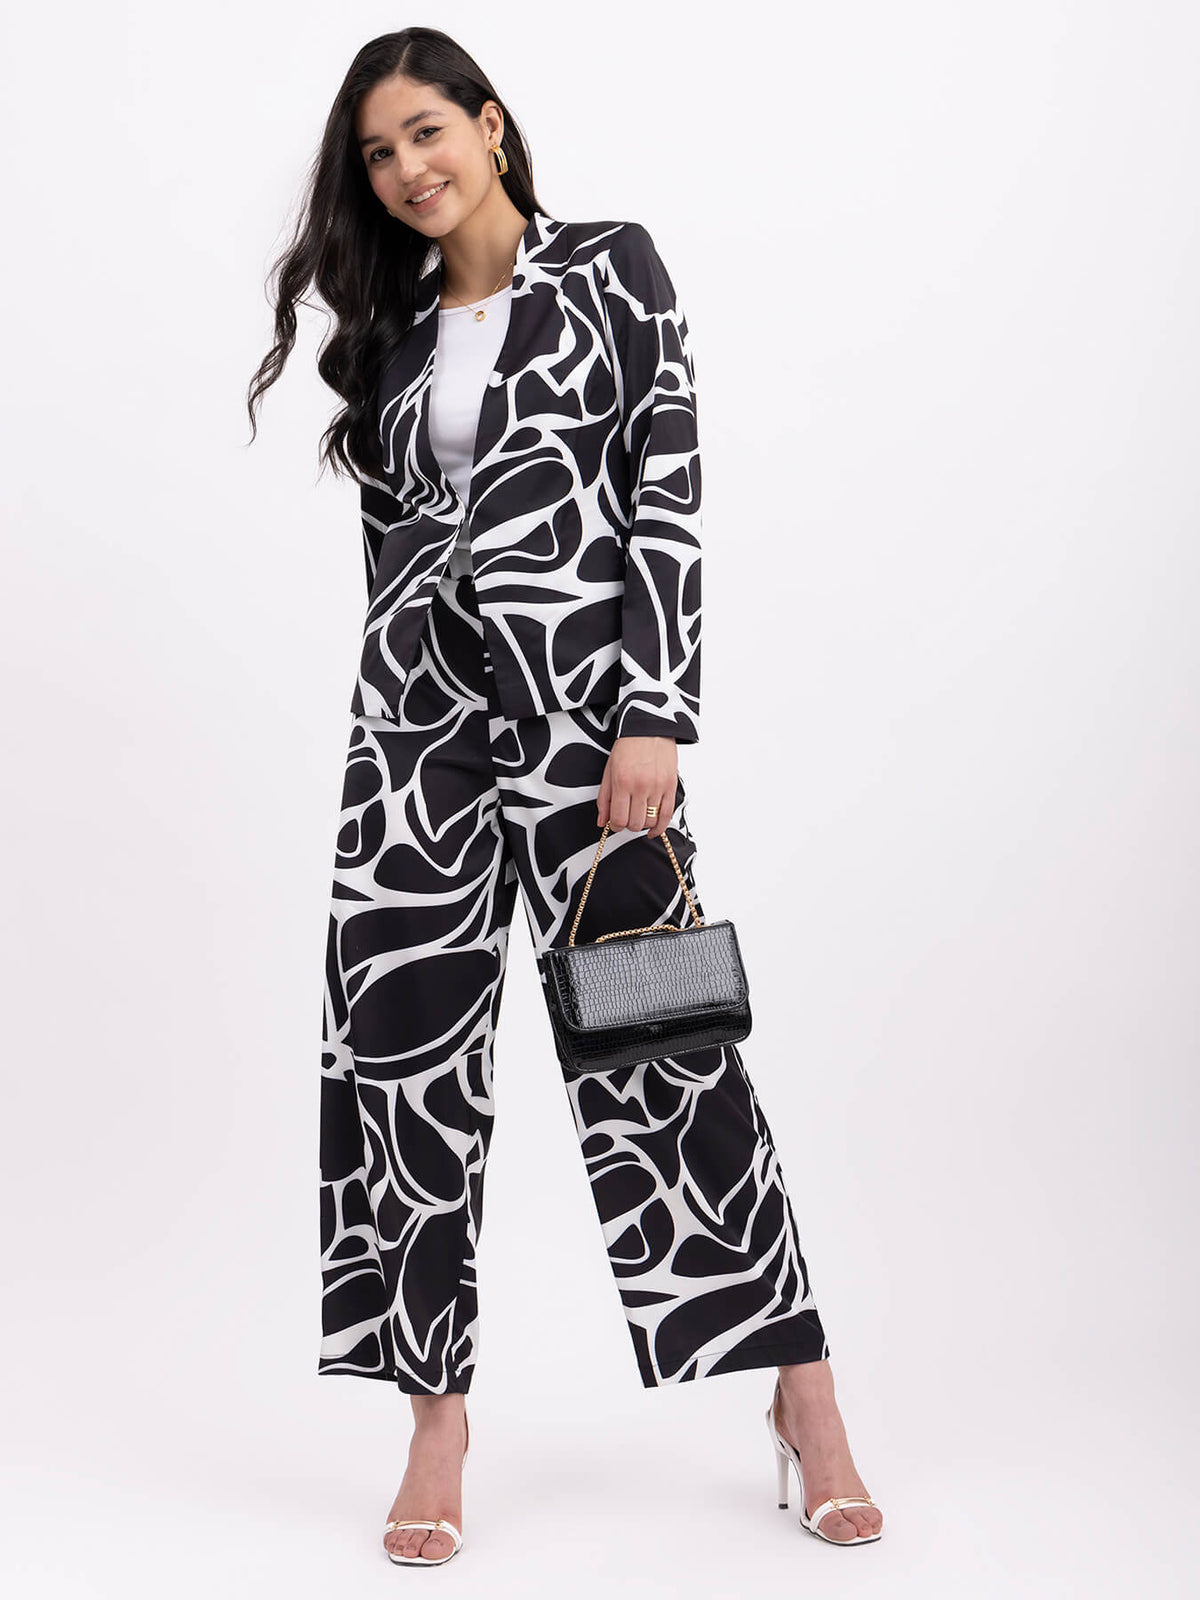 Satin Lined Jacket And Pants Co-ord - Black And White